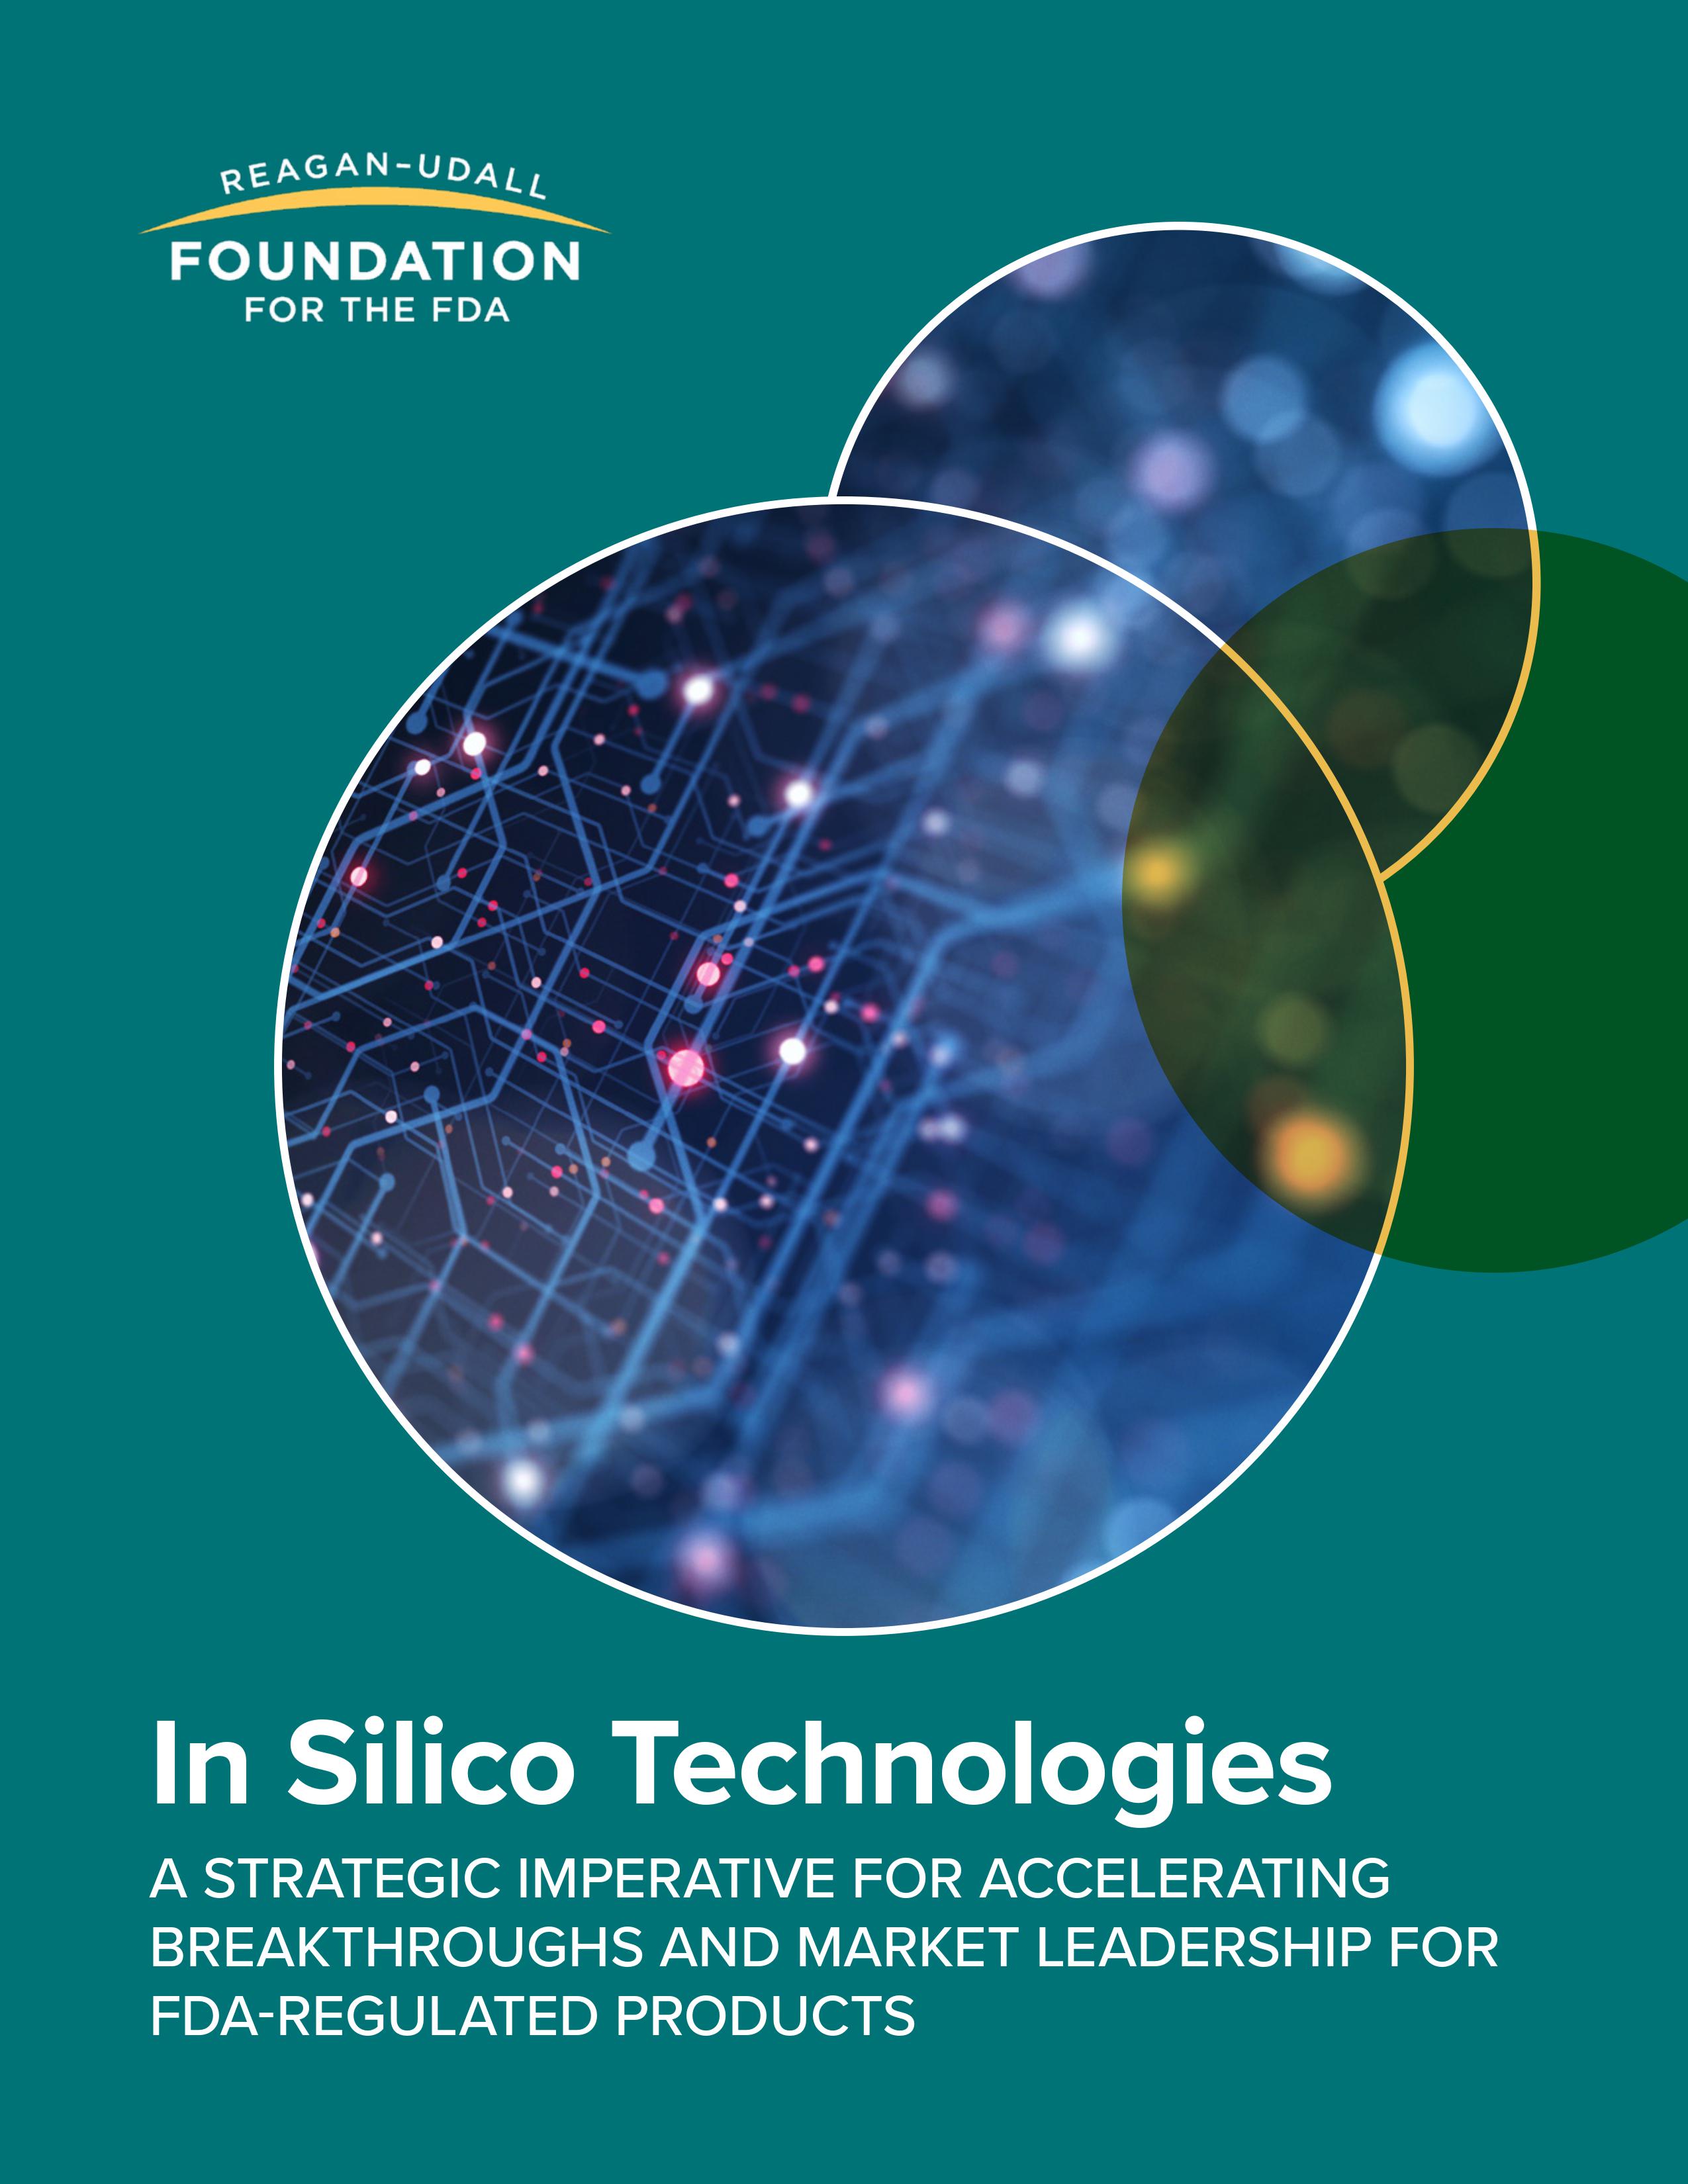 In Silico Technology Report